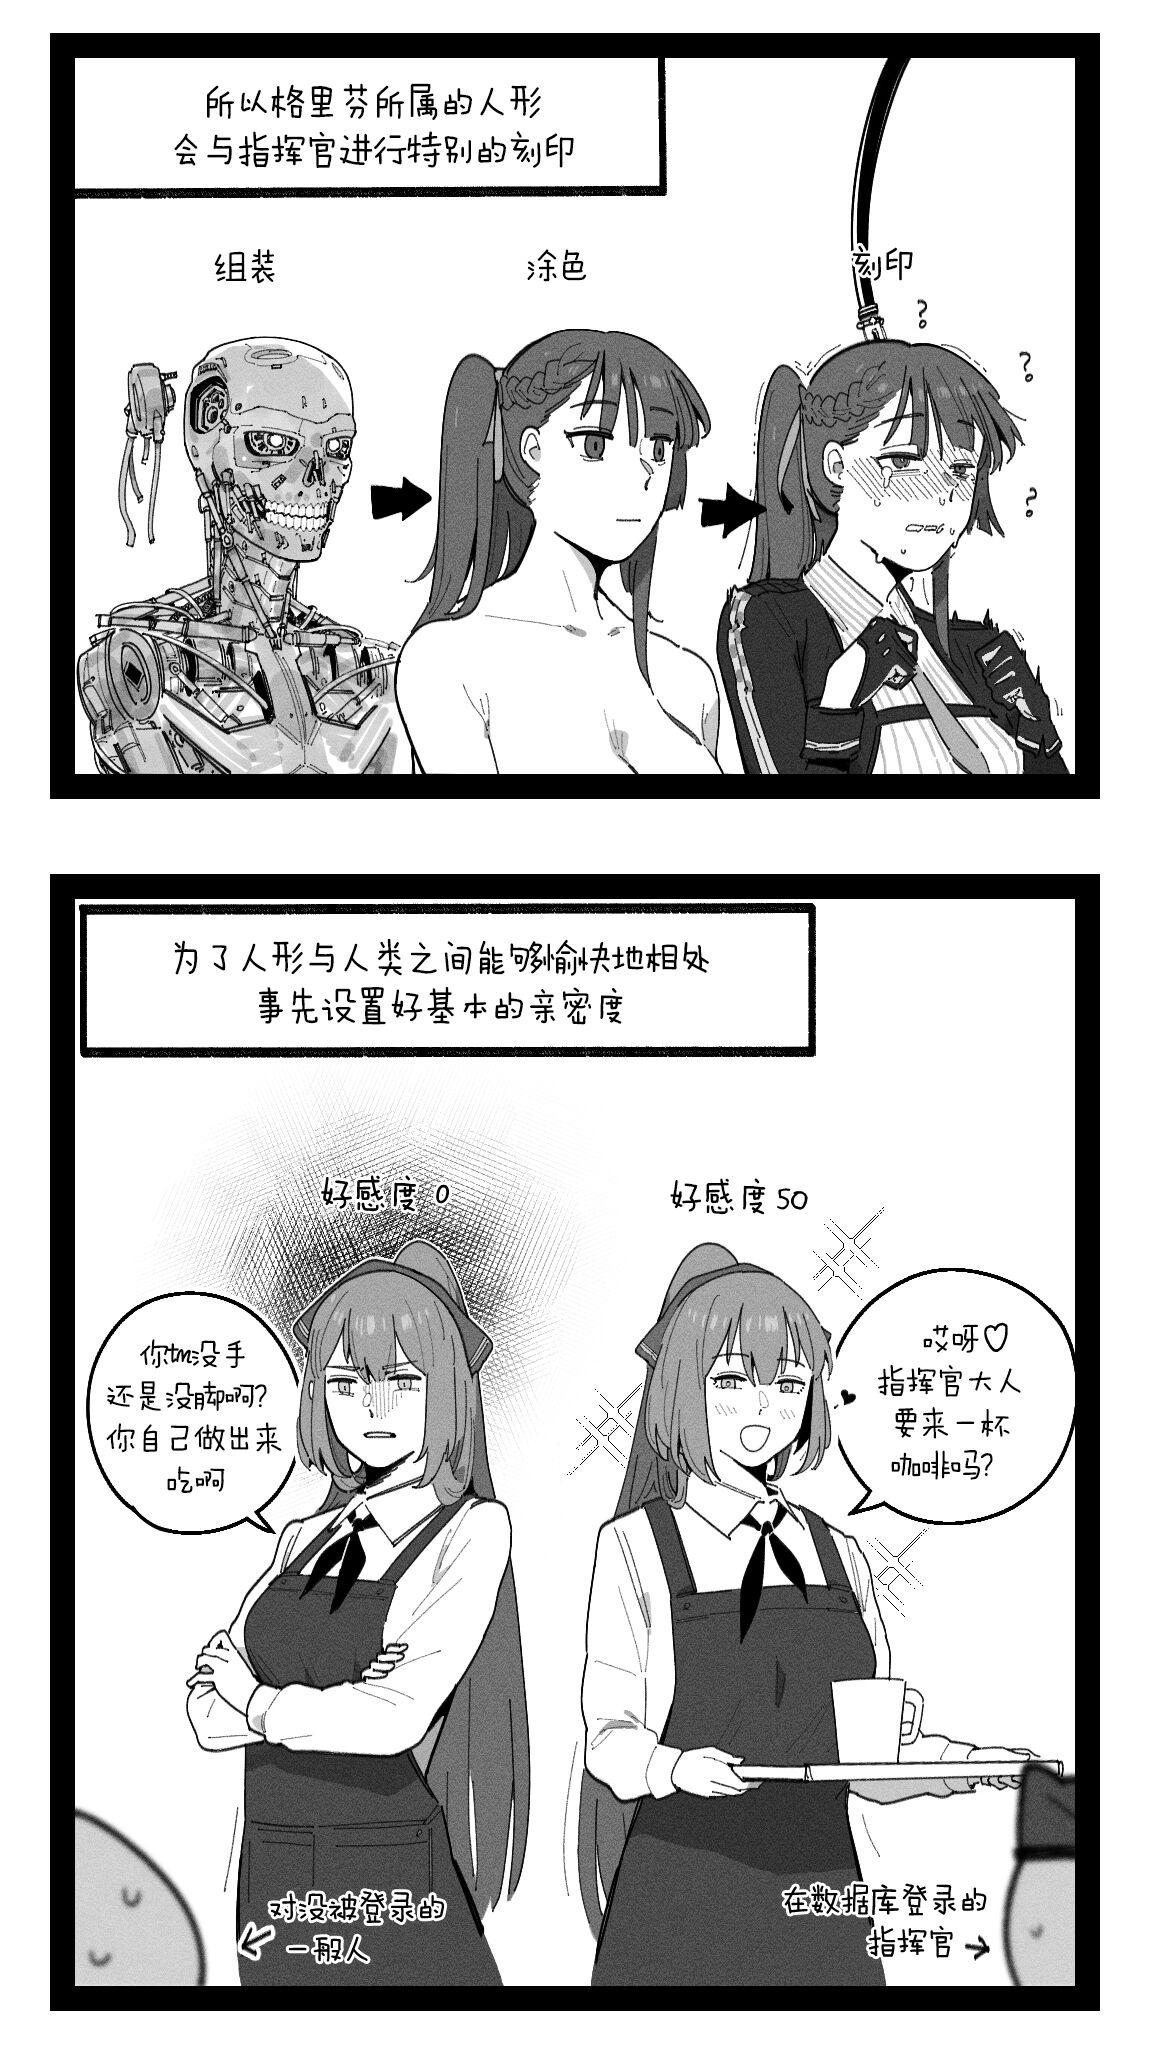  Griffin Commanders - Girls frontline Cum On Face - Page 2